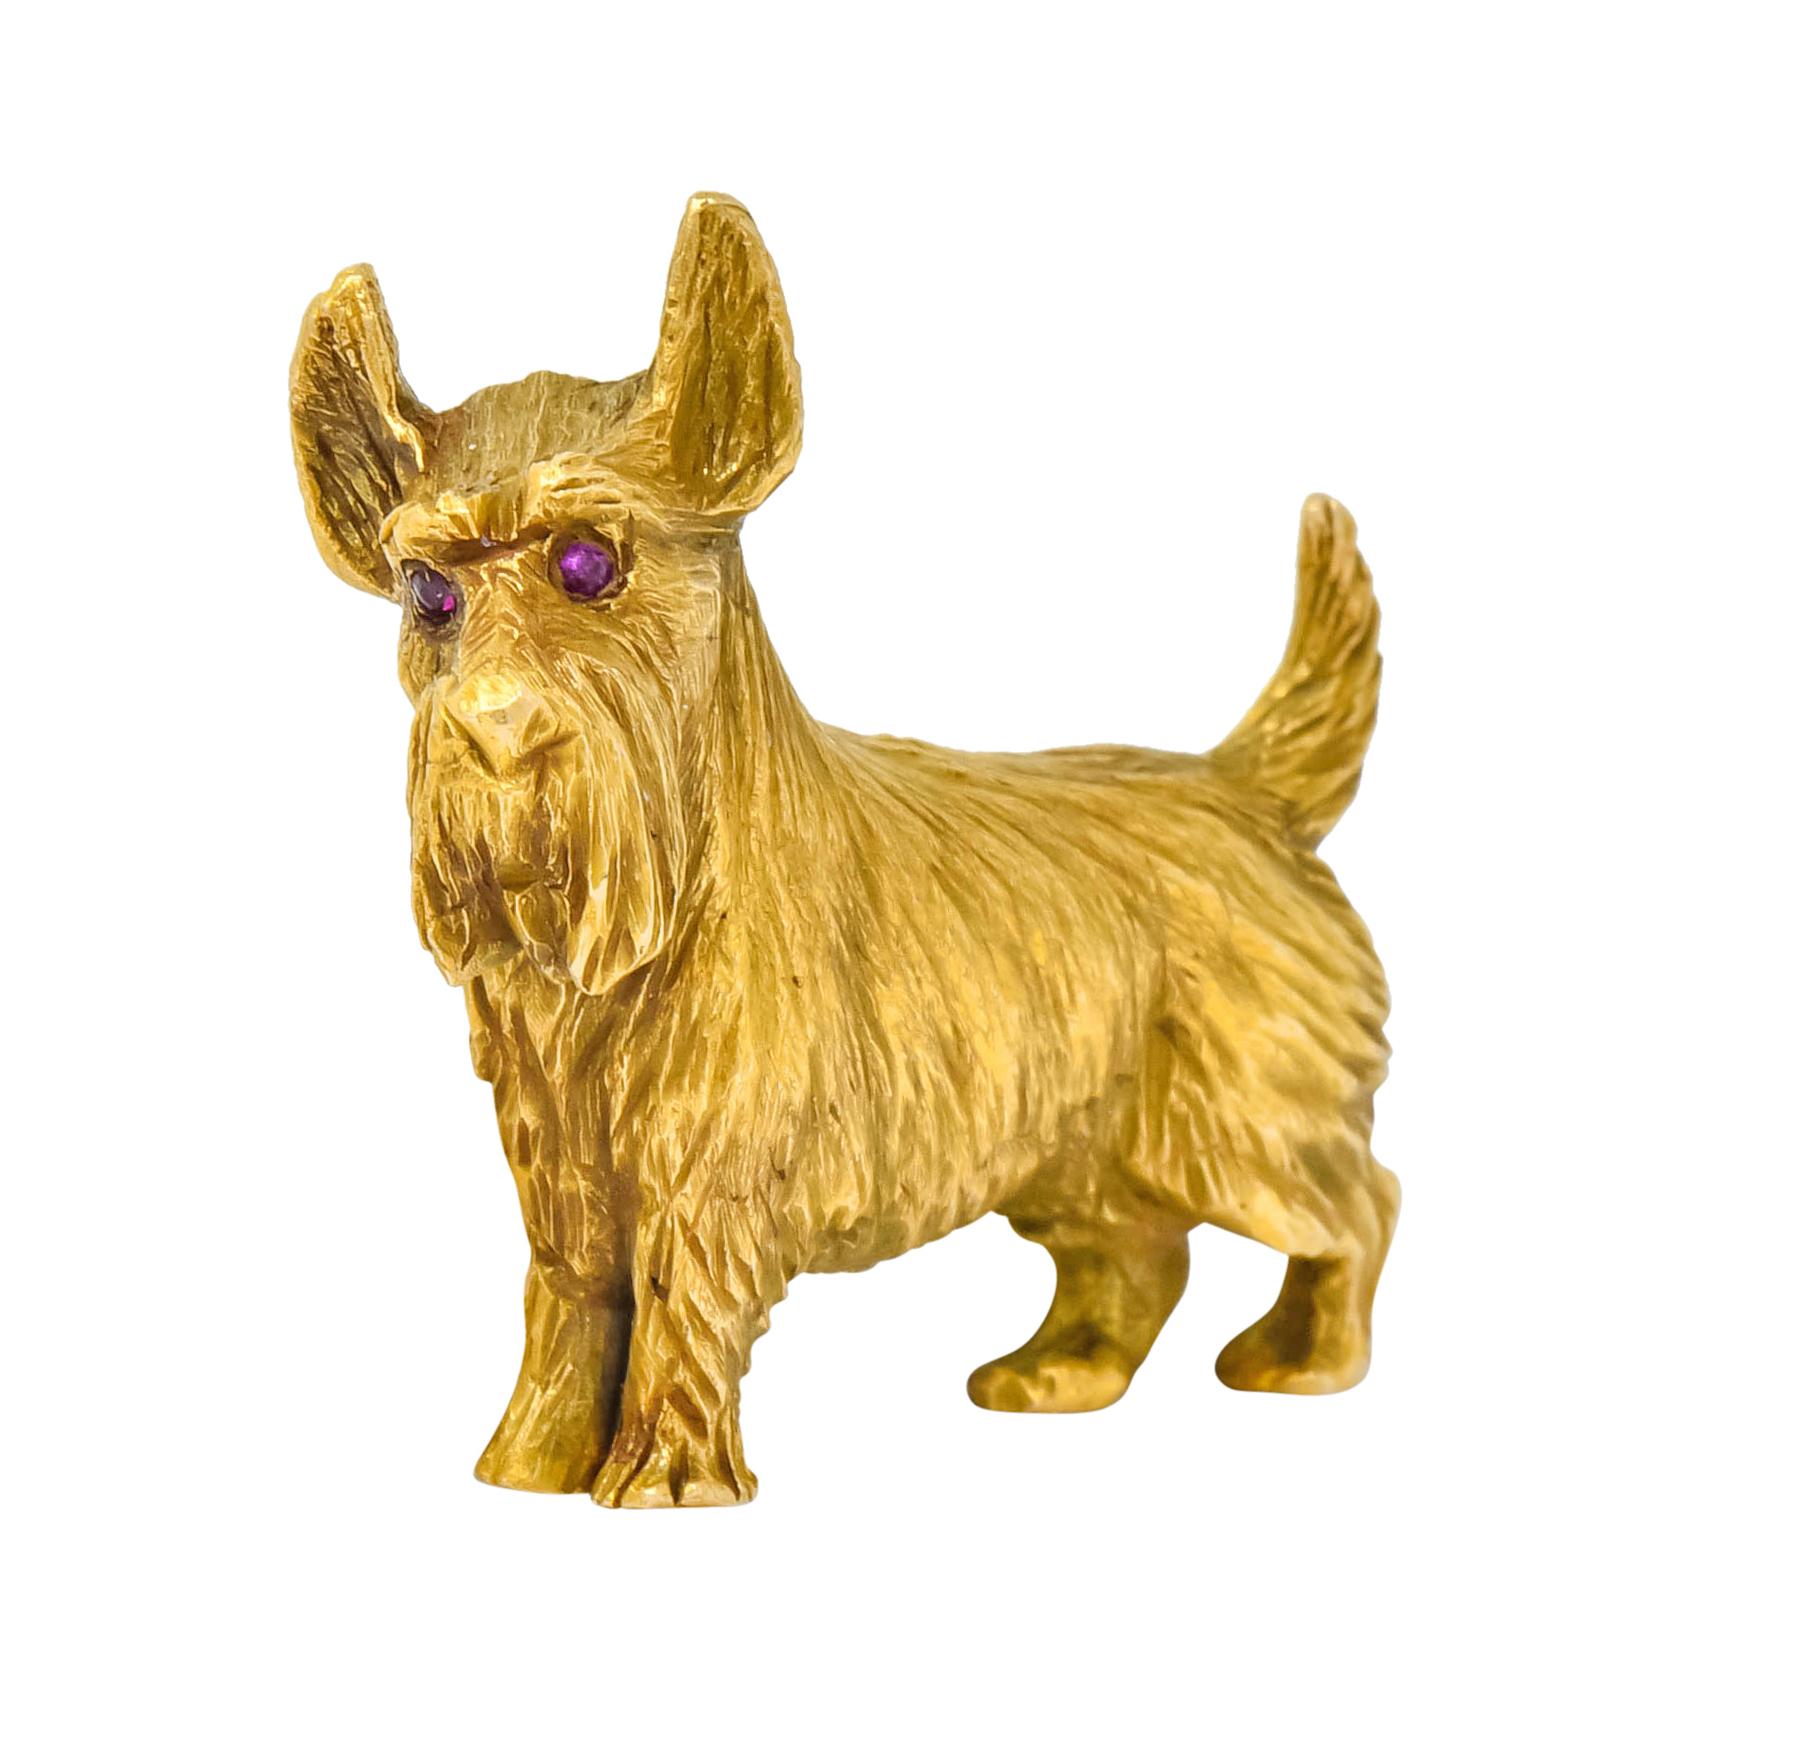 Designed as a sweet Scottie dog

With highly detailed textured gold fur

Accented with a rich ruby eye

Stamped 14K with serial number

Measuring: 1 1/2 Inch

Circa 1940

Total Weight: 16.4 Grams

Adorable. Friendly. Lovable. 
 

Stock Number: We-